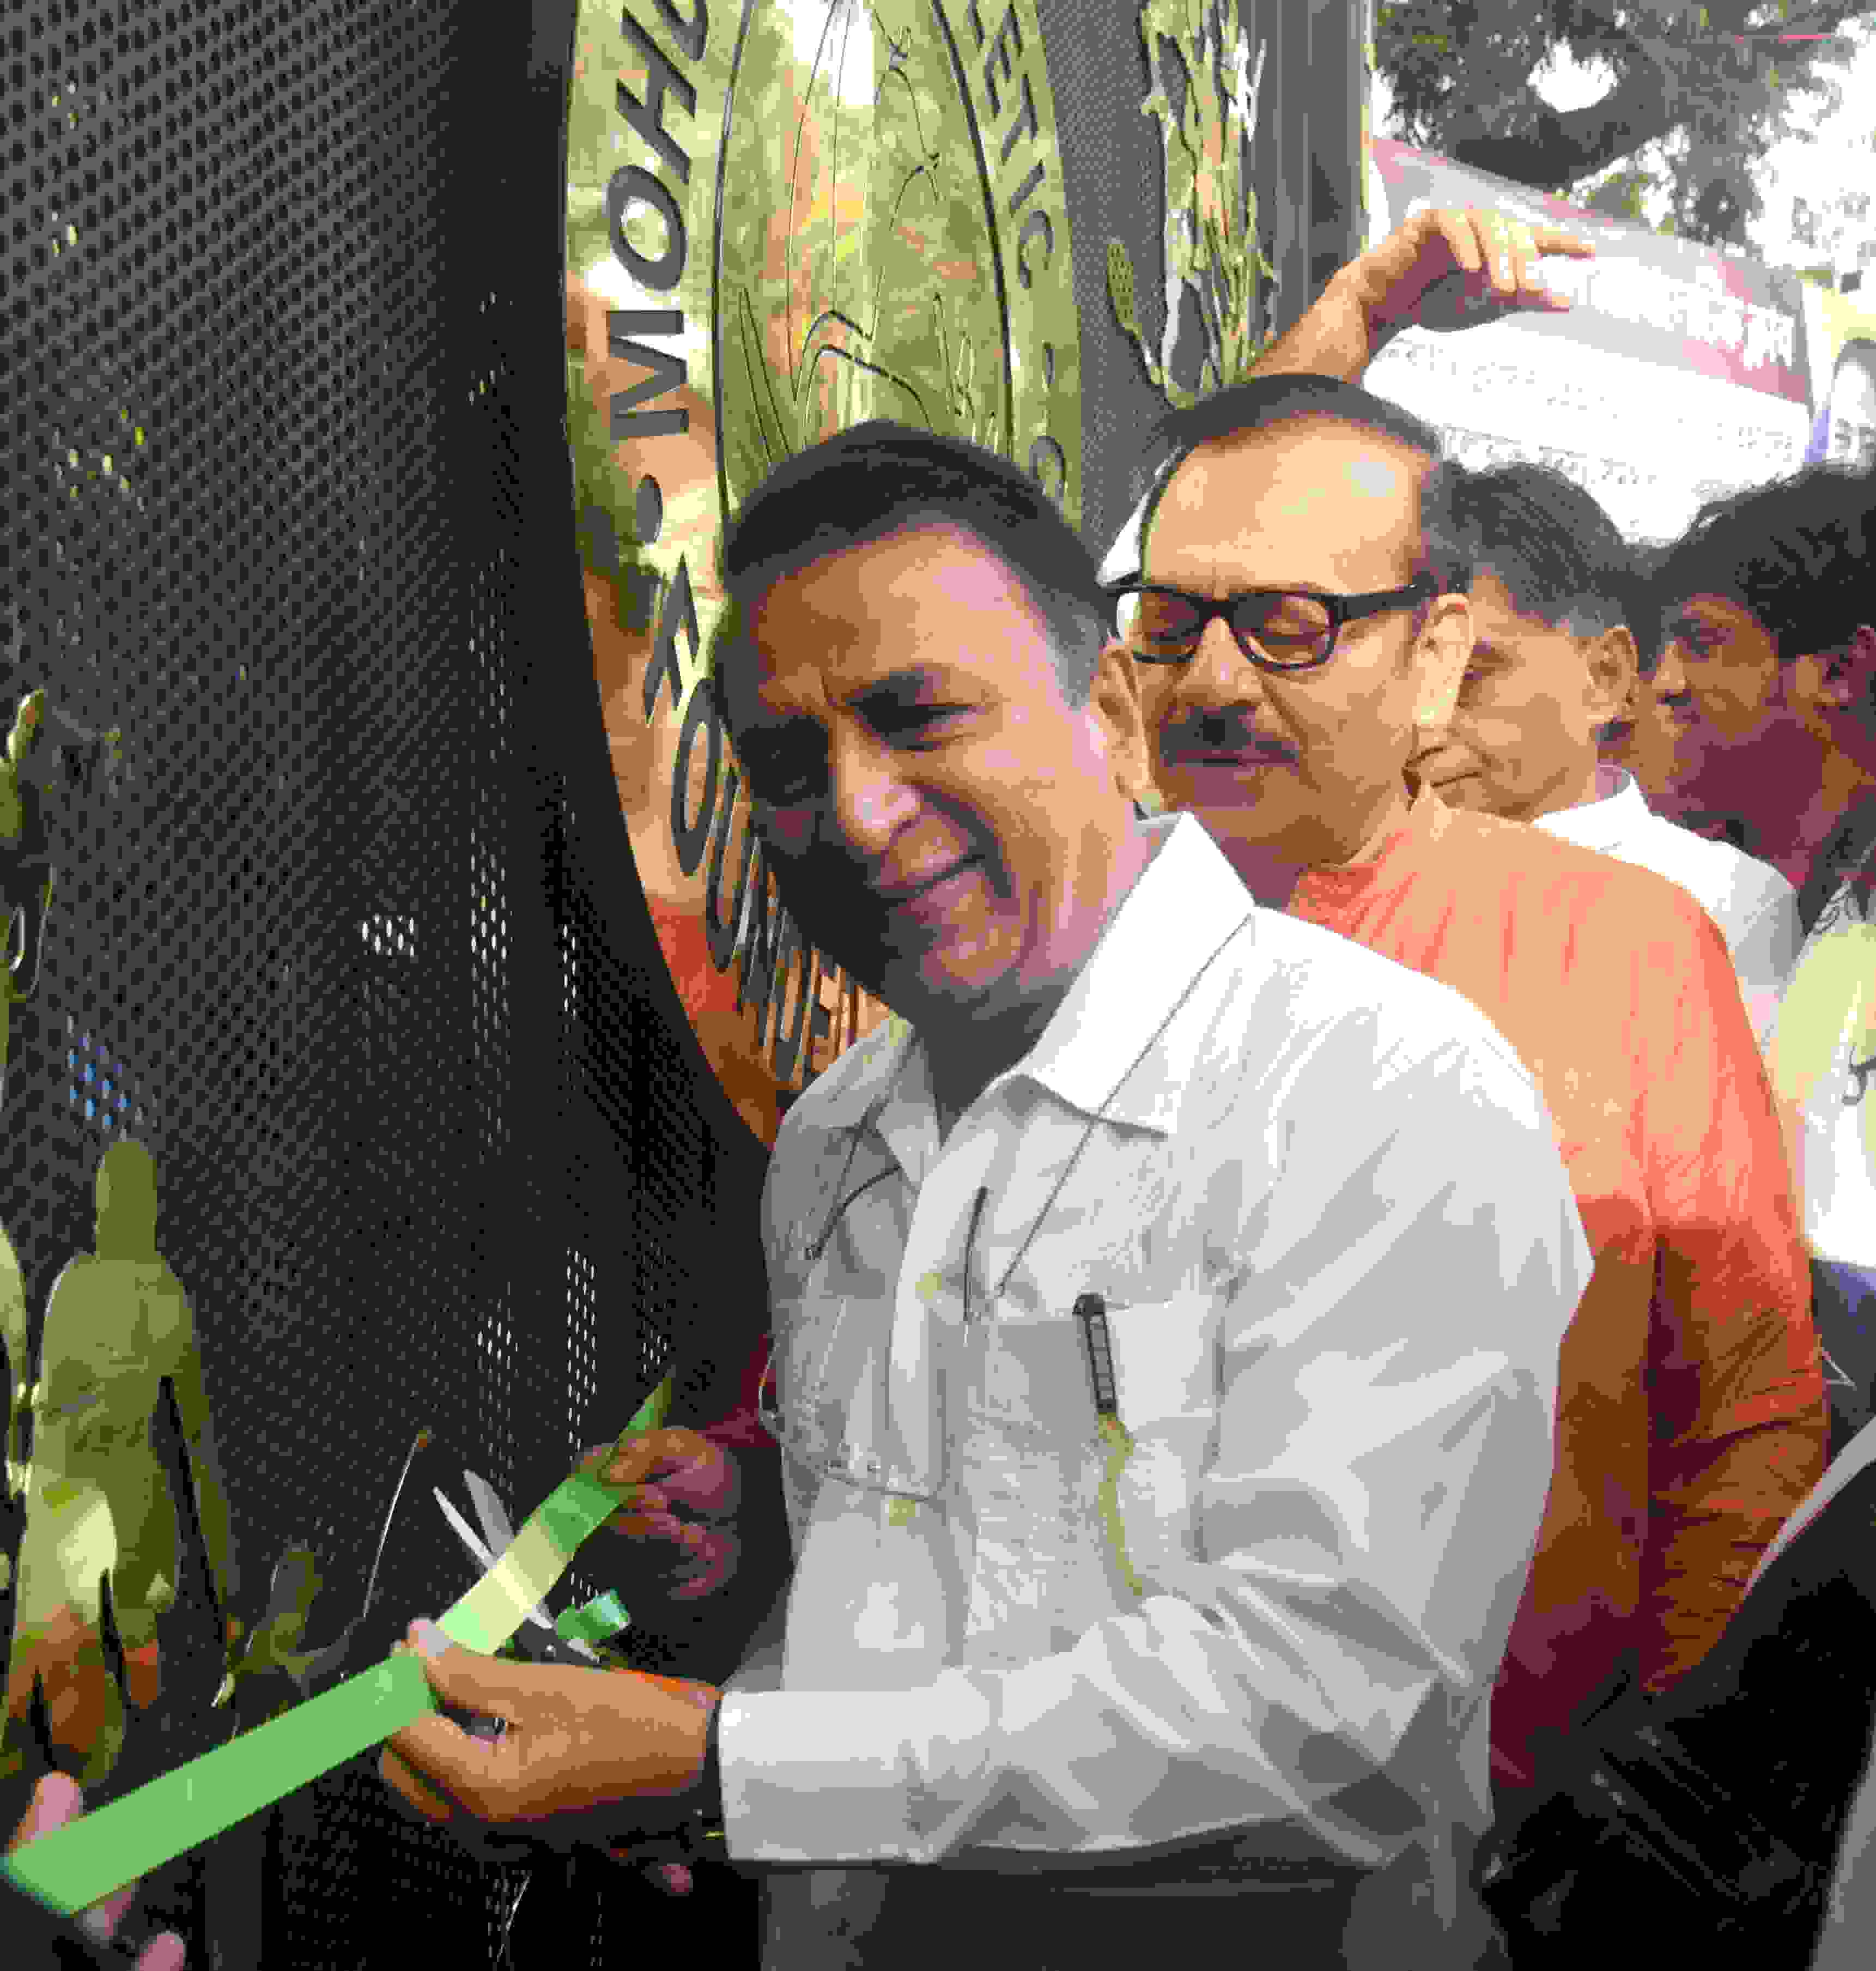 The main gate of Mohun Bagan Club was renamed as Chuni Goswami Gate on Saturday. Legendary cricketer Sunil Gavaskar inaugurated the gate in the presence of West Bengal Sports and Youth Affairs minister Aroop Biswas